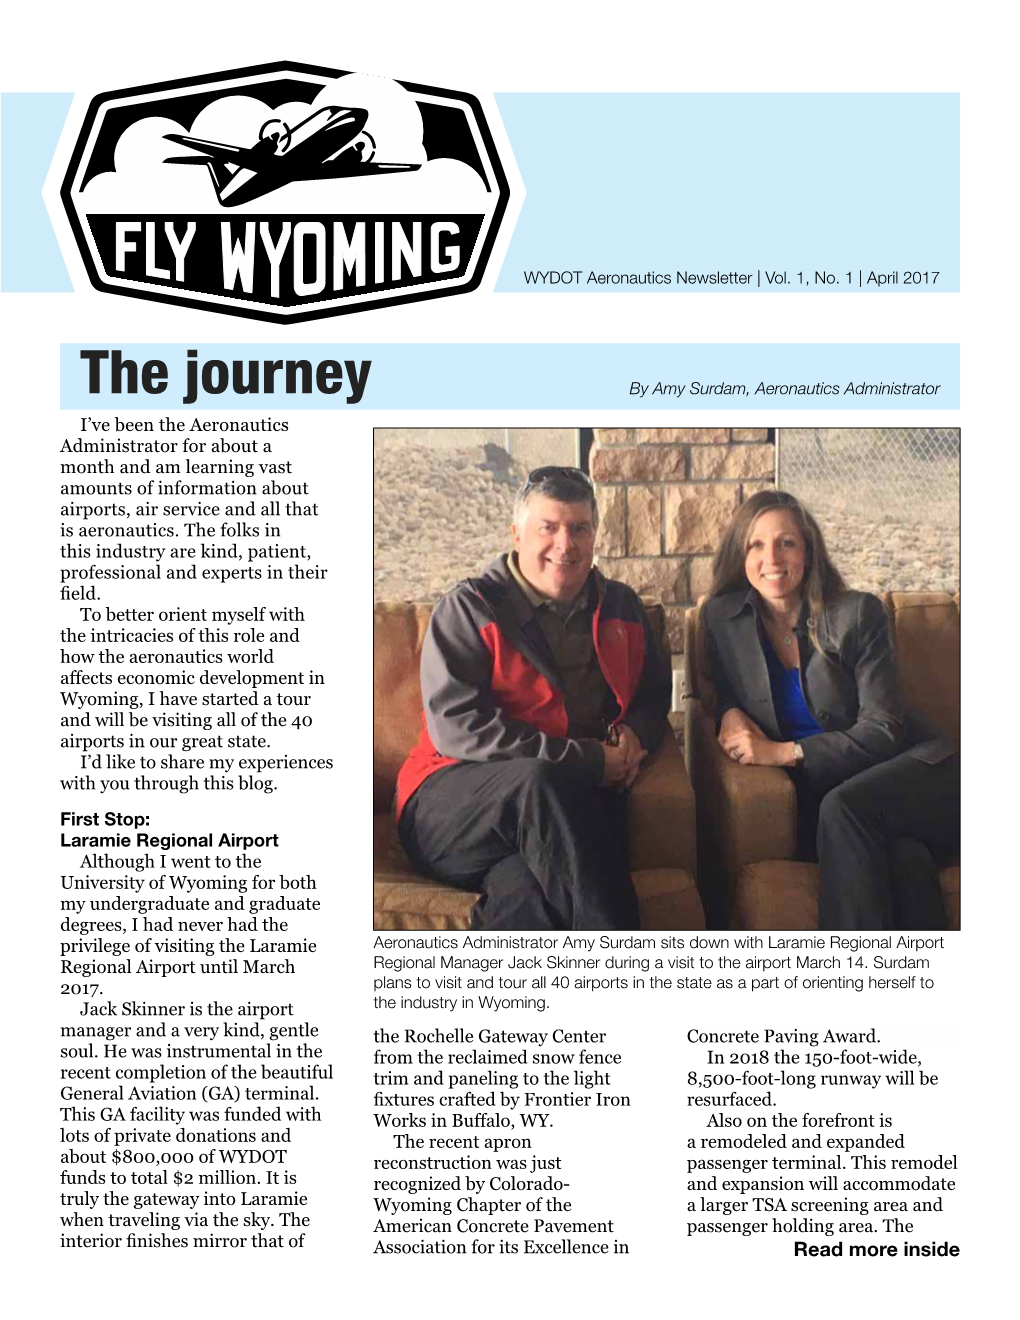 Read the April 2017 Fly Wyoming